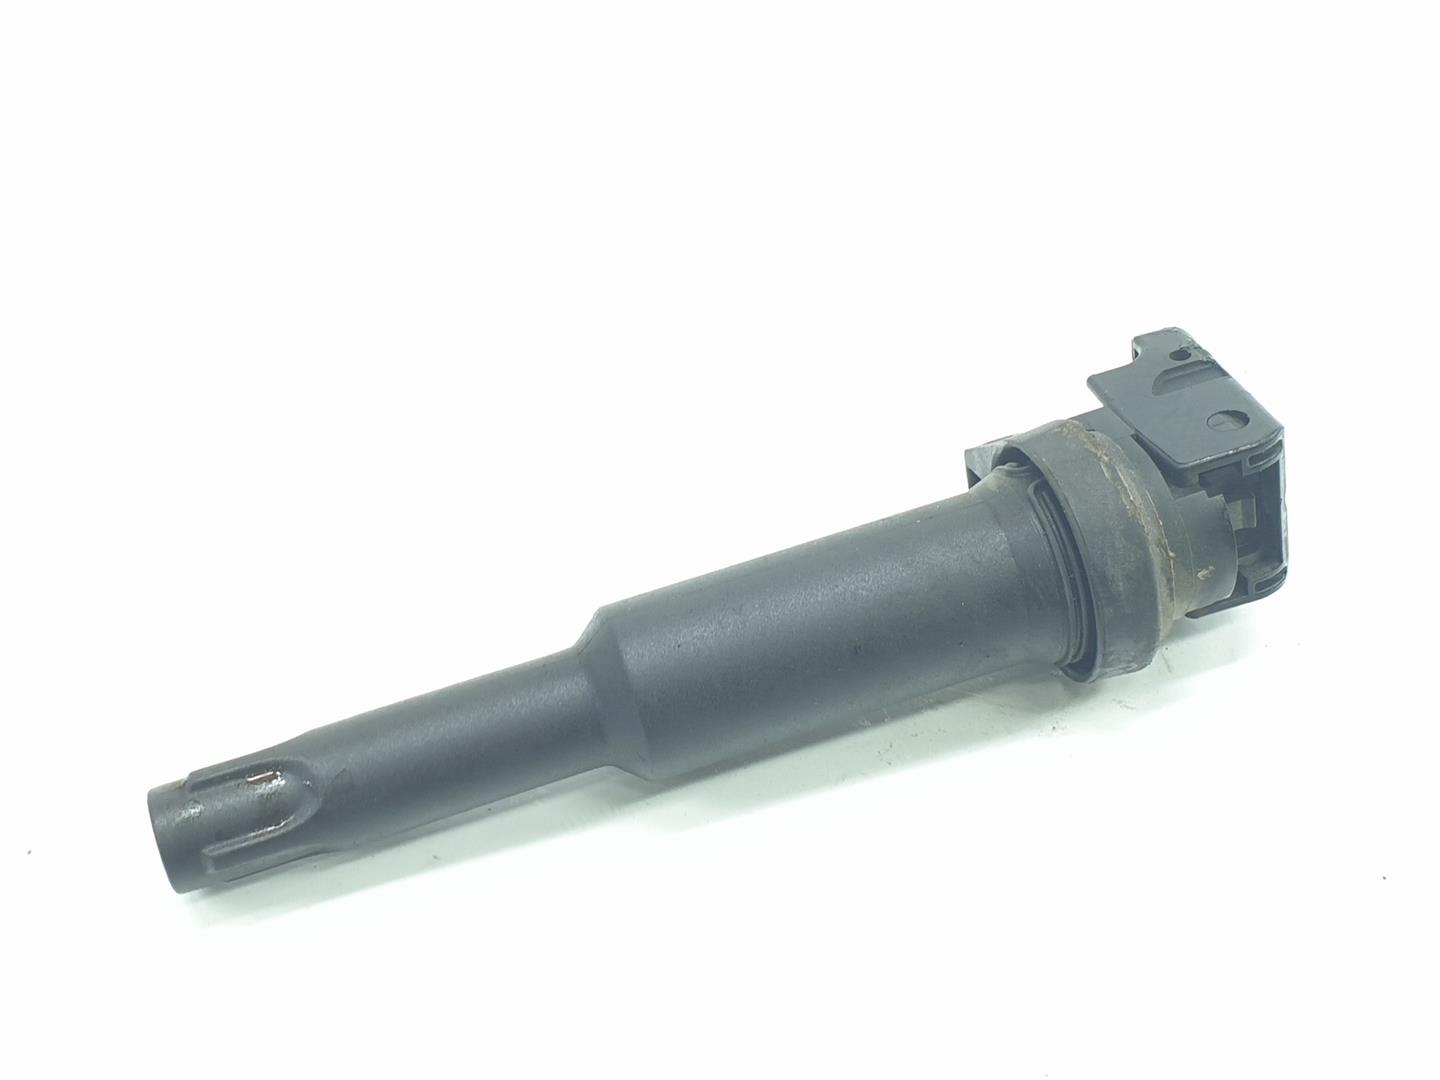 BMW 6 Series E63/E64 (2003-2010) High Voltage Ignition Coil 7548553, 7548553, 1111AA 24700087